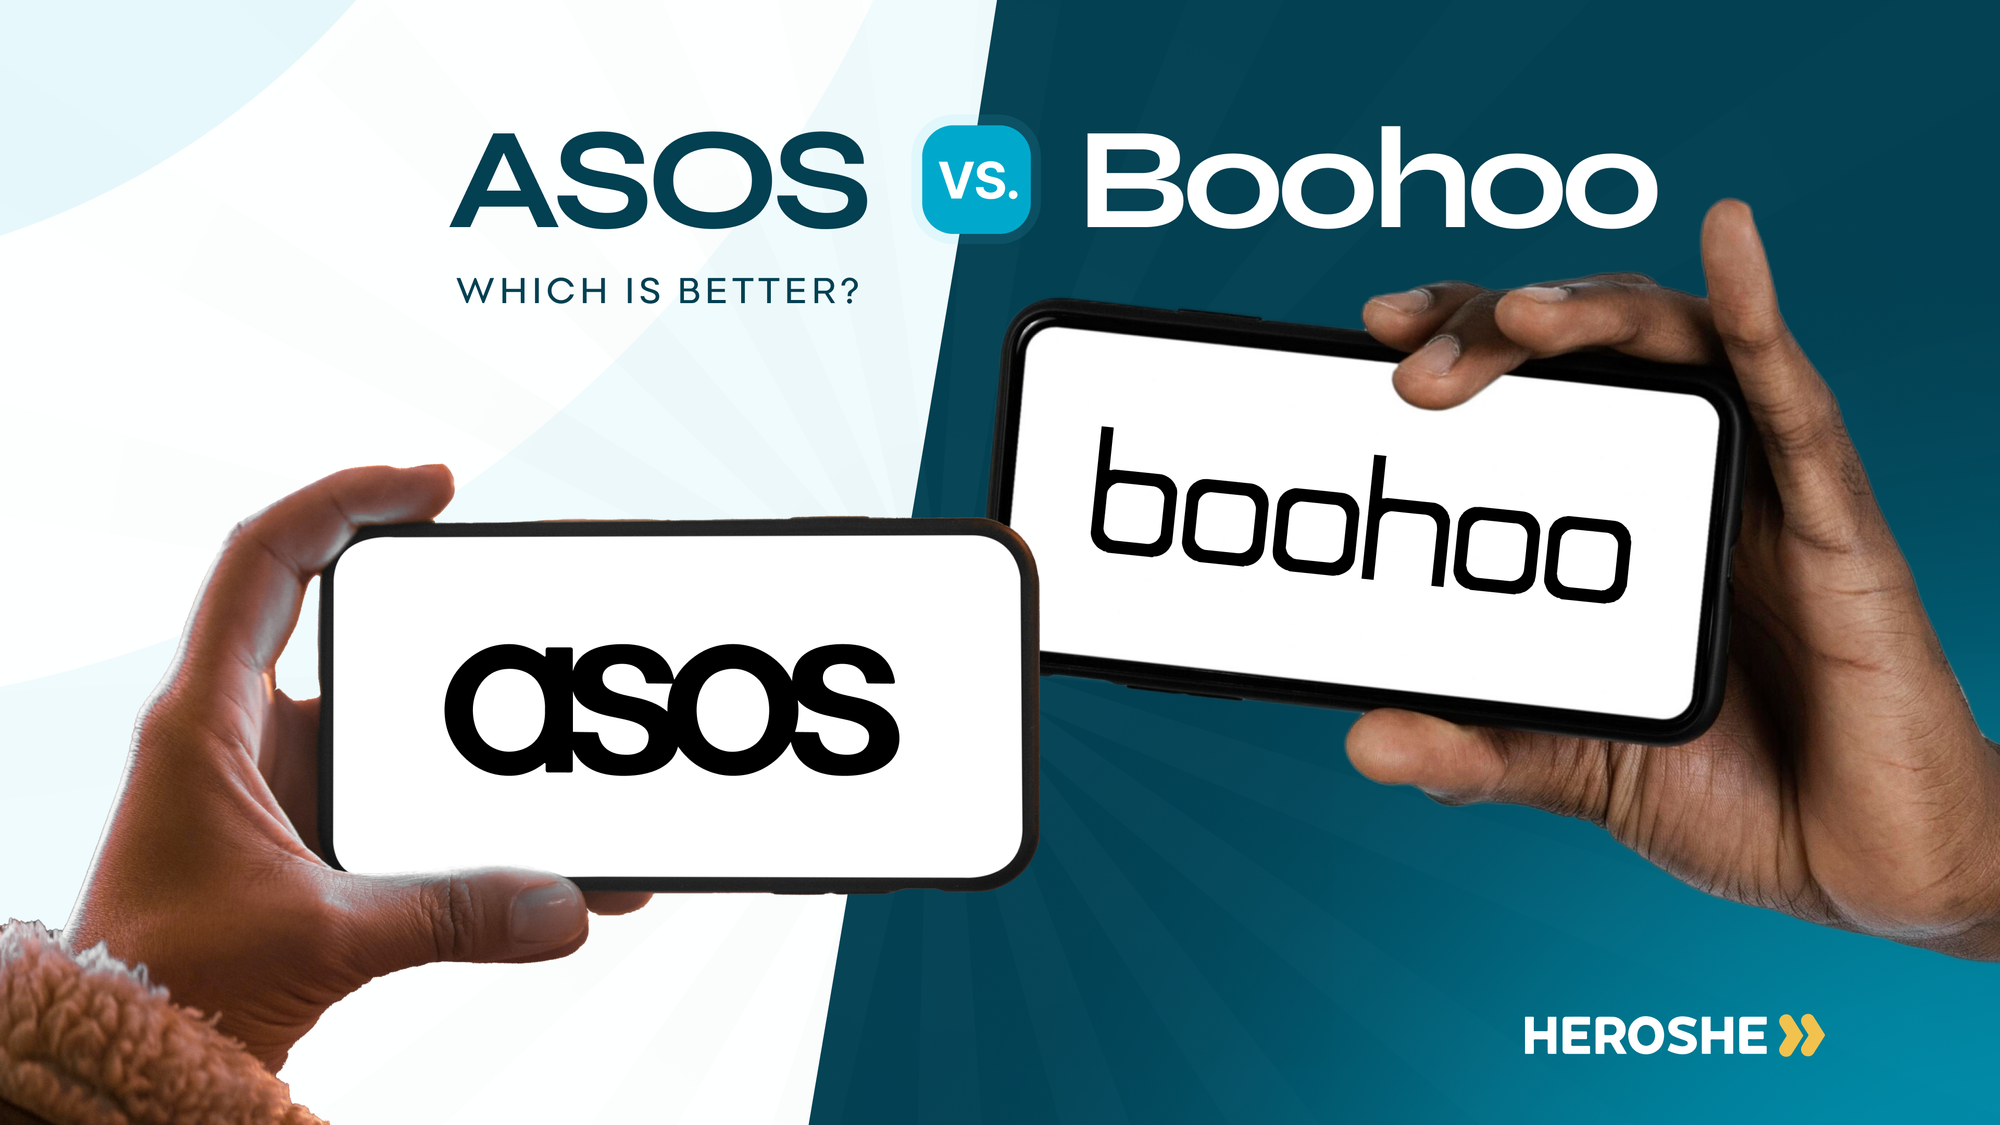 ASOS vs Boohoo: Which is Better?